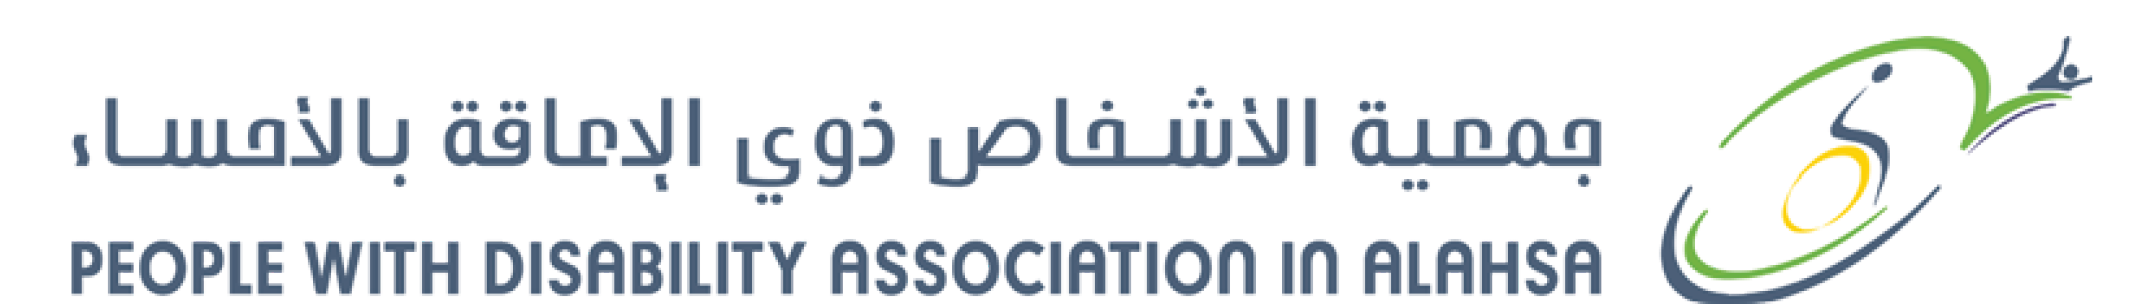 Disabled Persons' Association